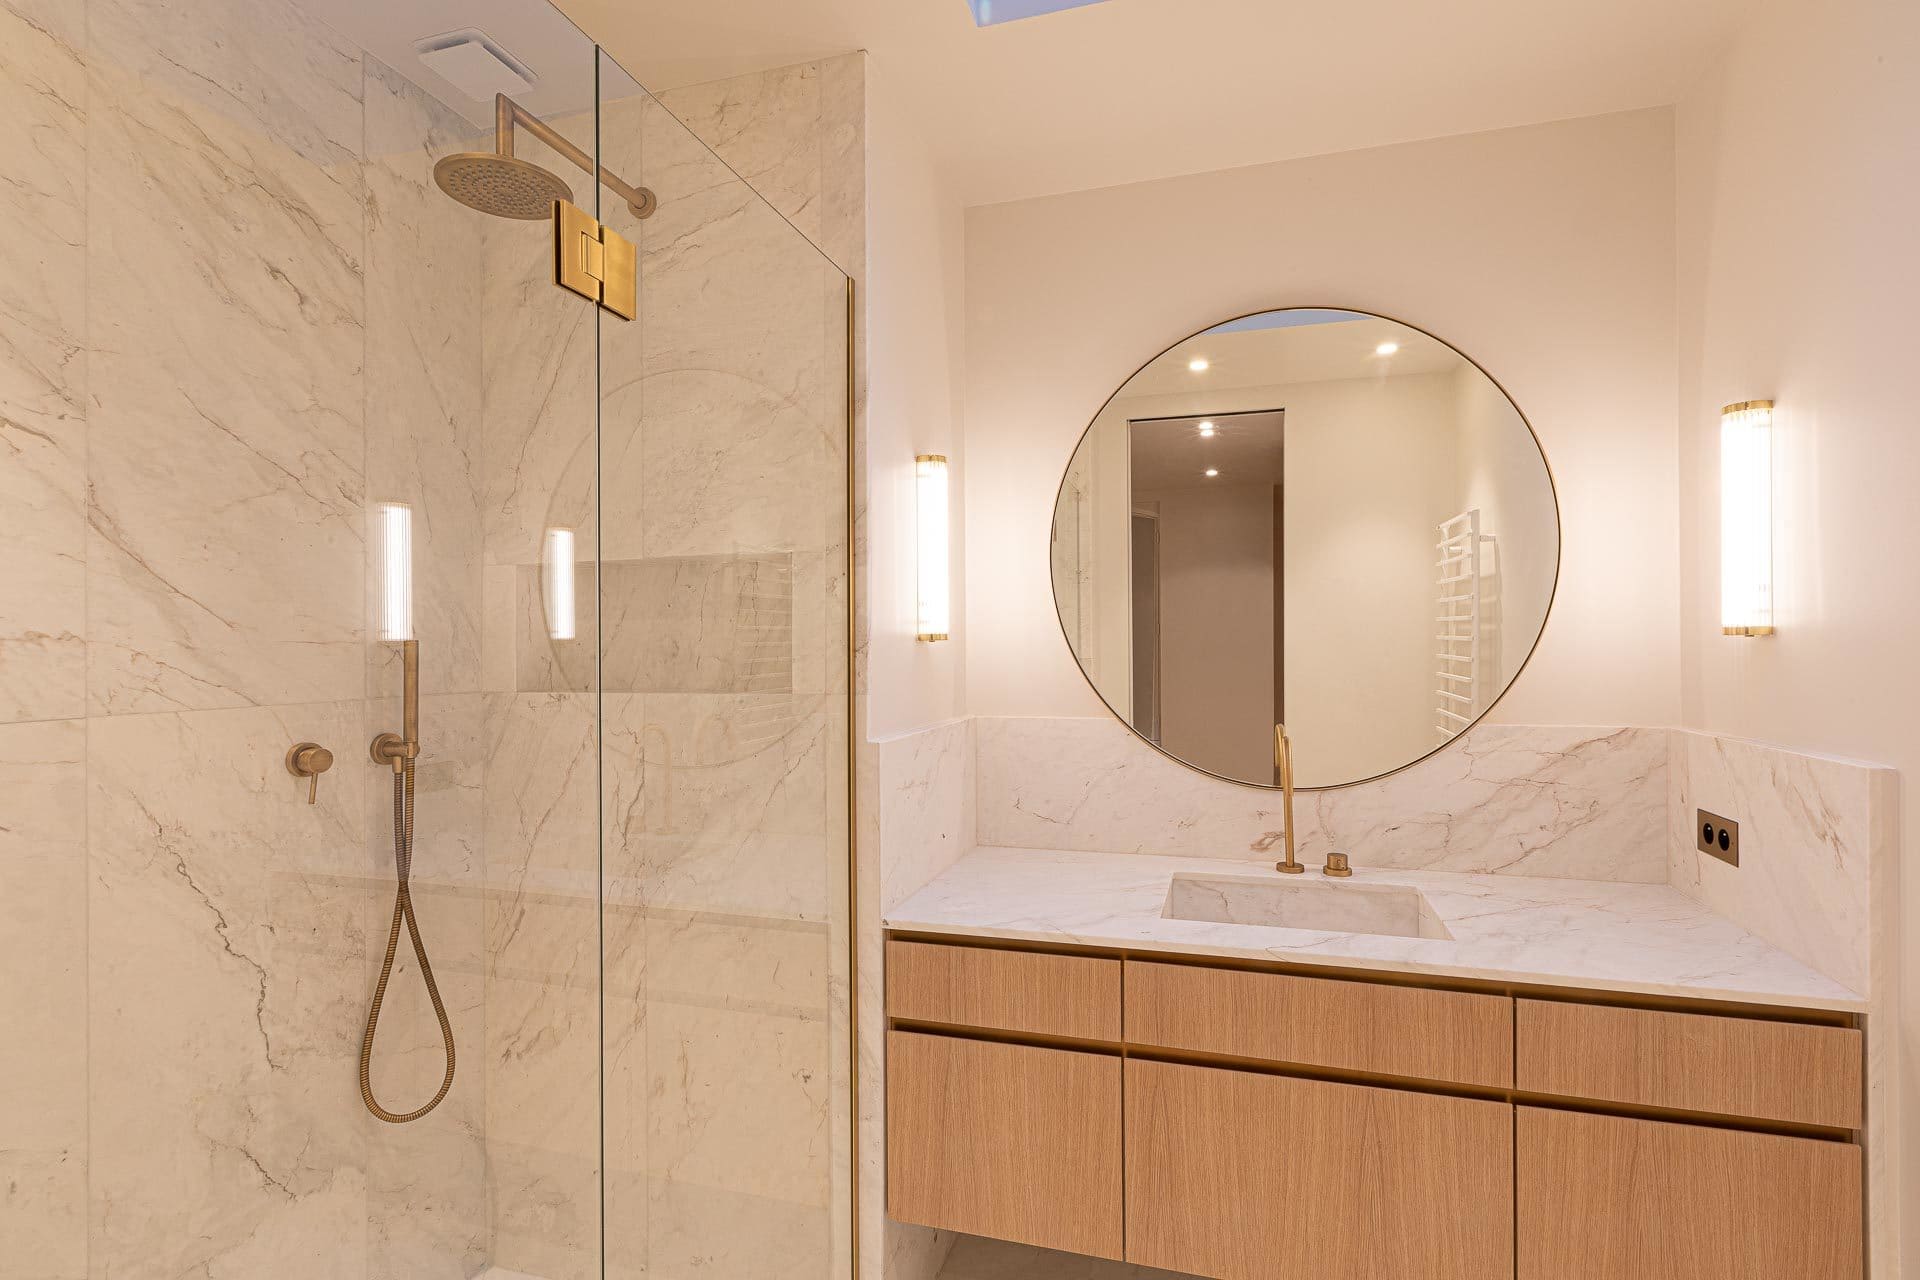 Design of a bathroom atmospheres in a luxury apartment